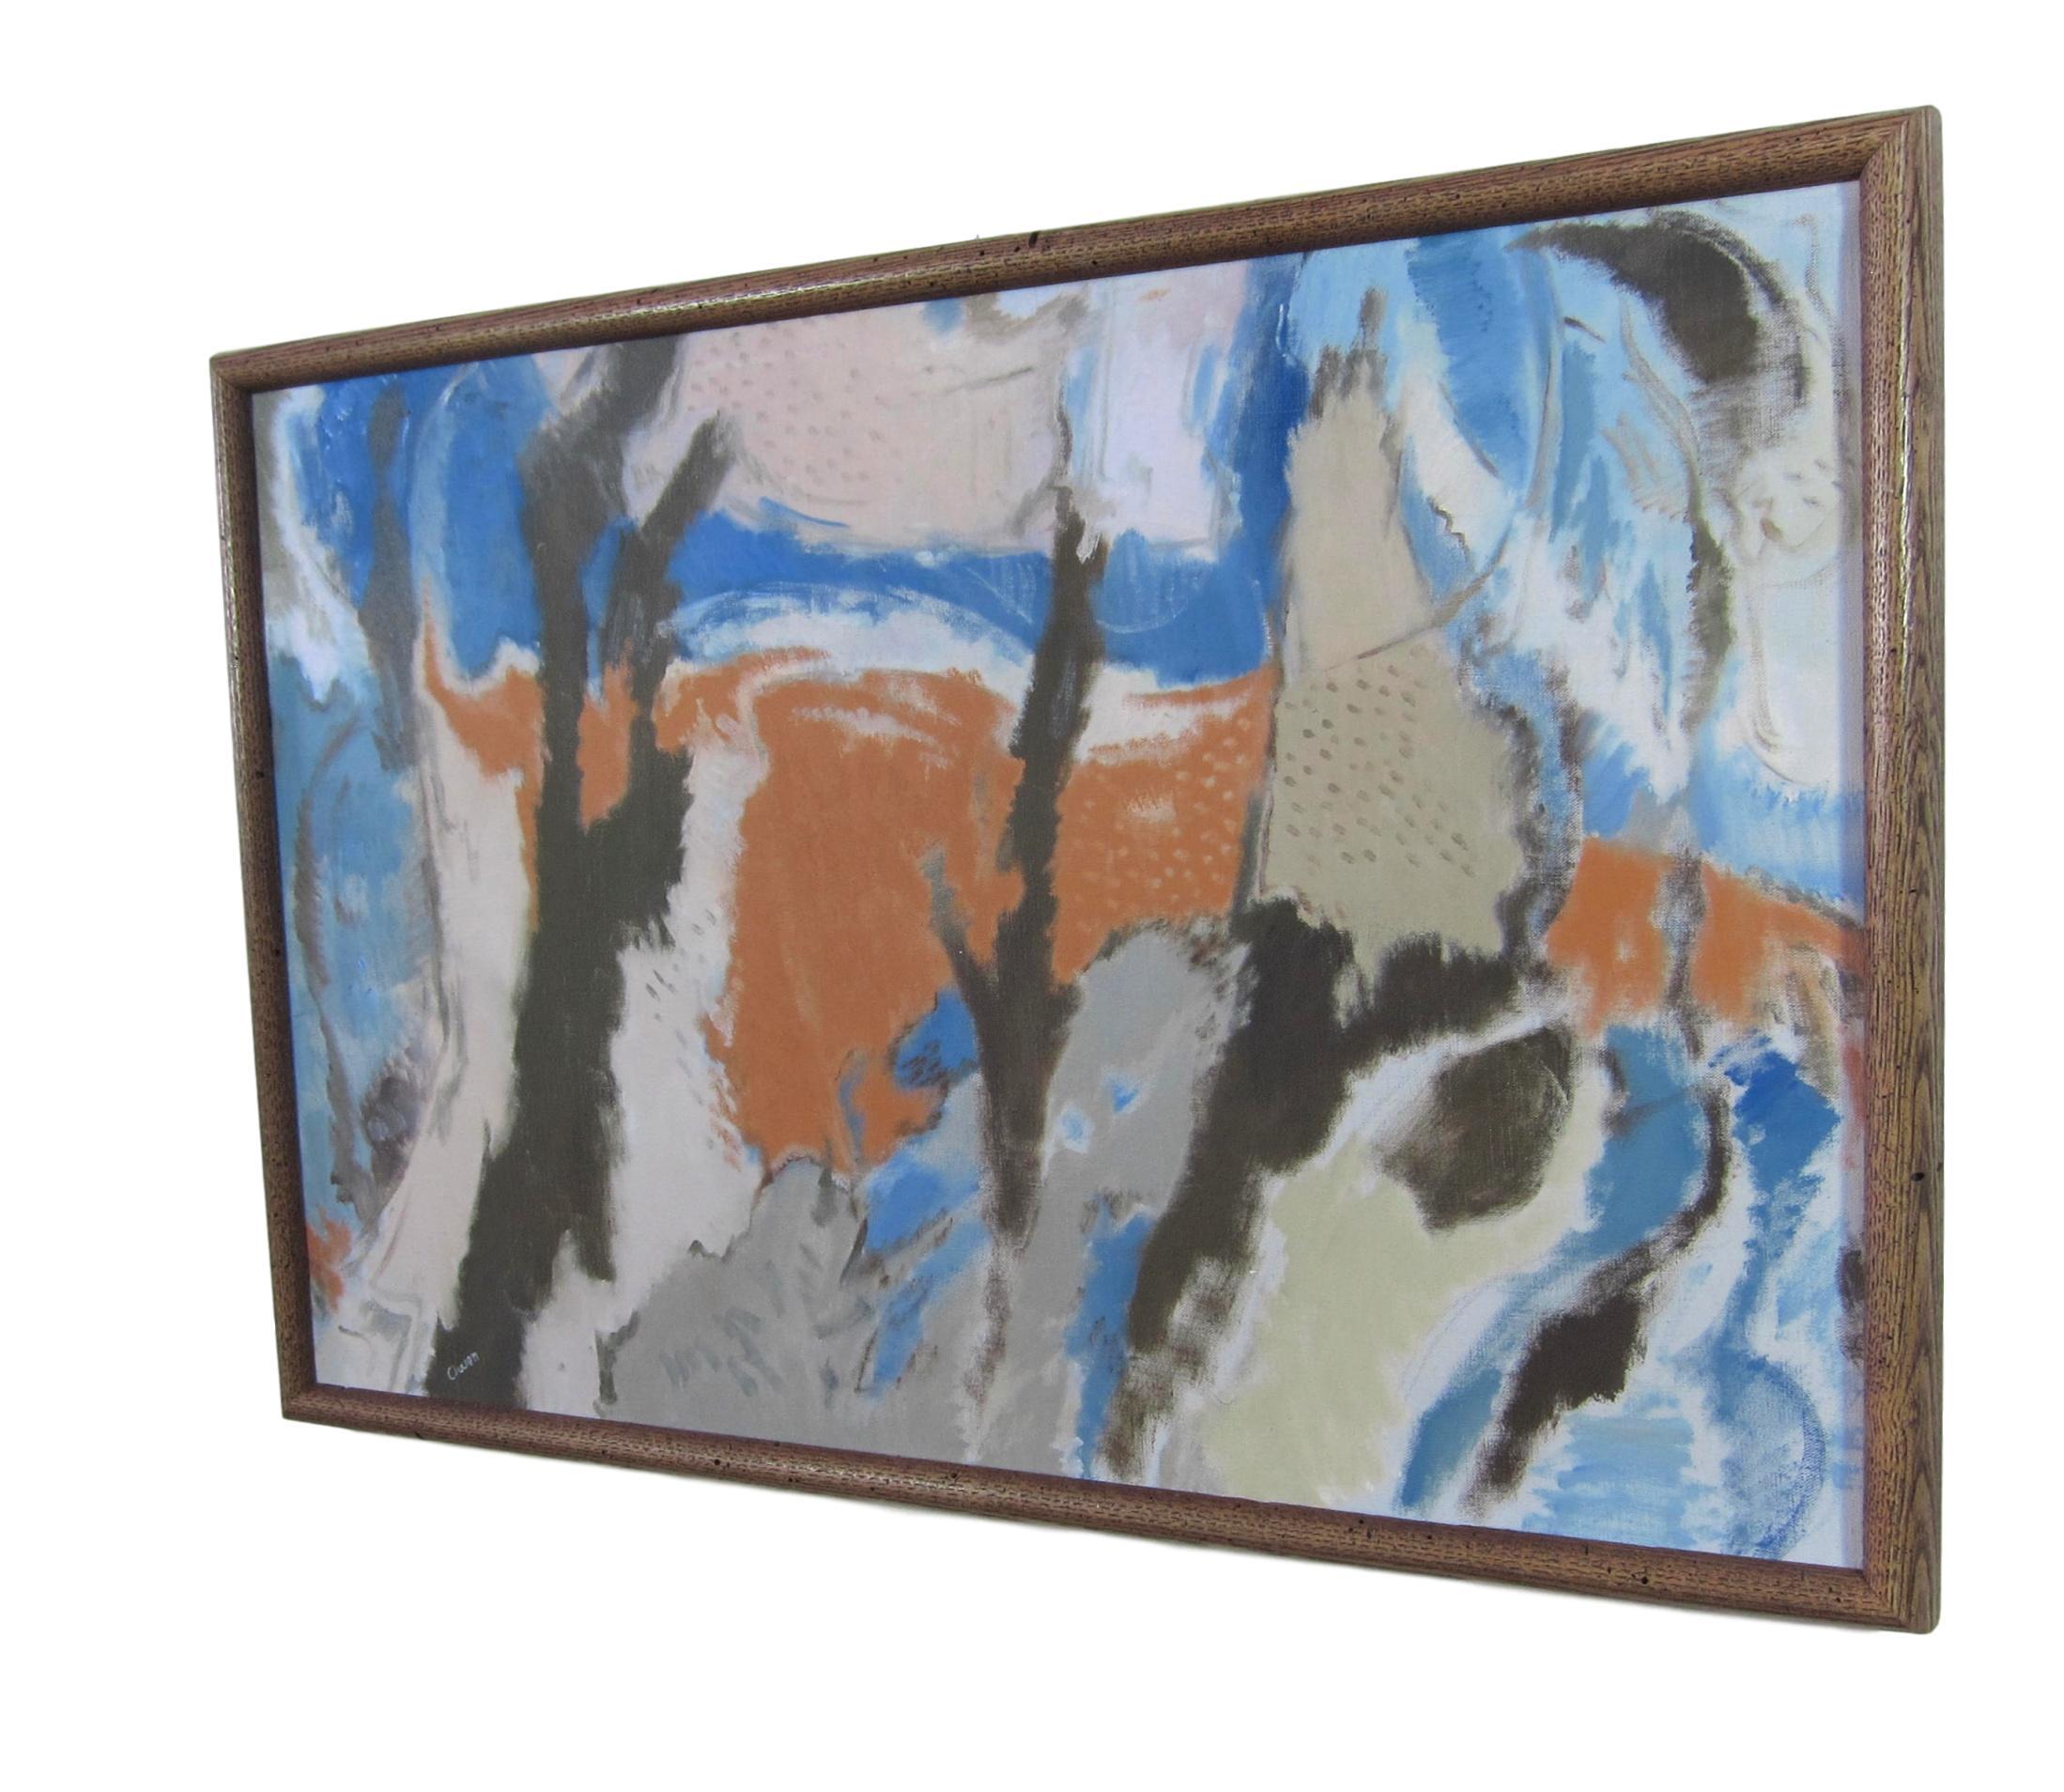 Mid-century modern abstract oil painting by American artist William Bishop Owen Jr. titled 'Mandalay'. This works comes from a collection of paintings by the artist that were held by the artist's family since the last exhibition of the artist's